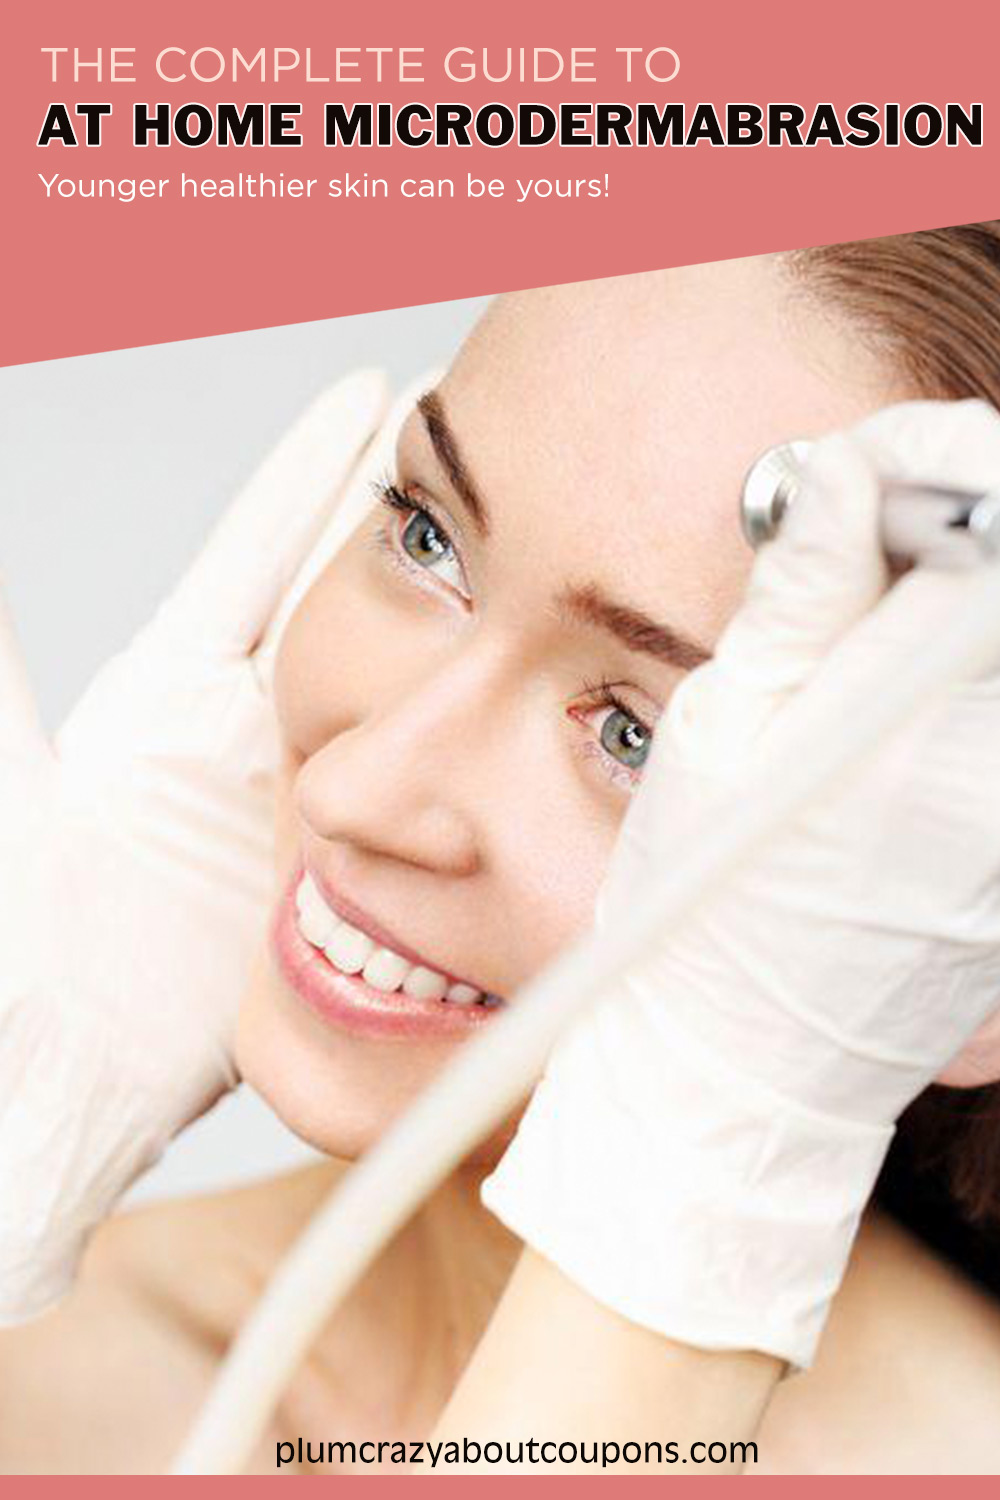 Microdermabrasion at home is a great way to improve your skin while keeping it affordable!